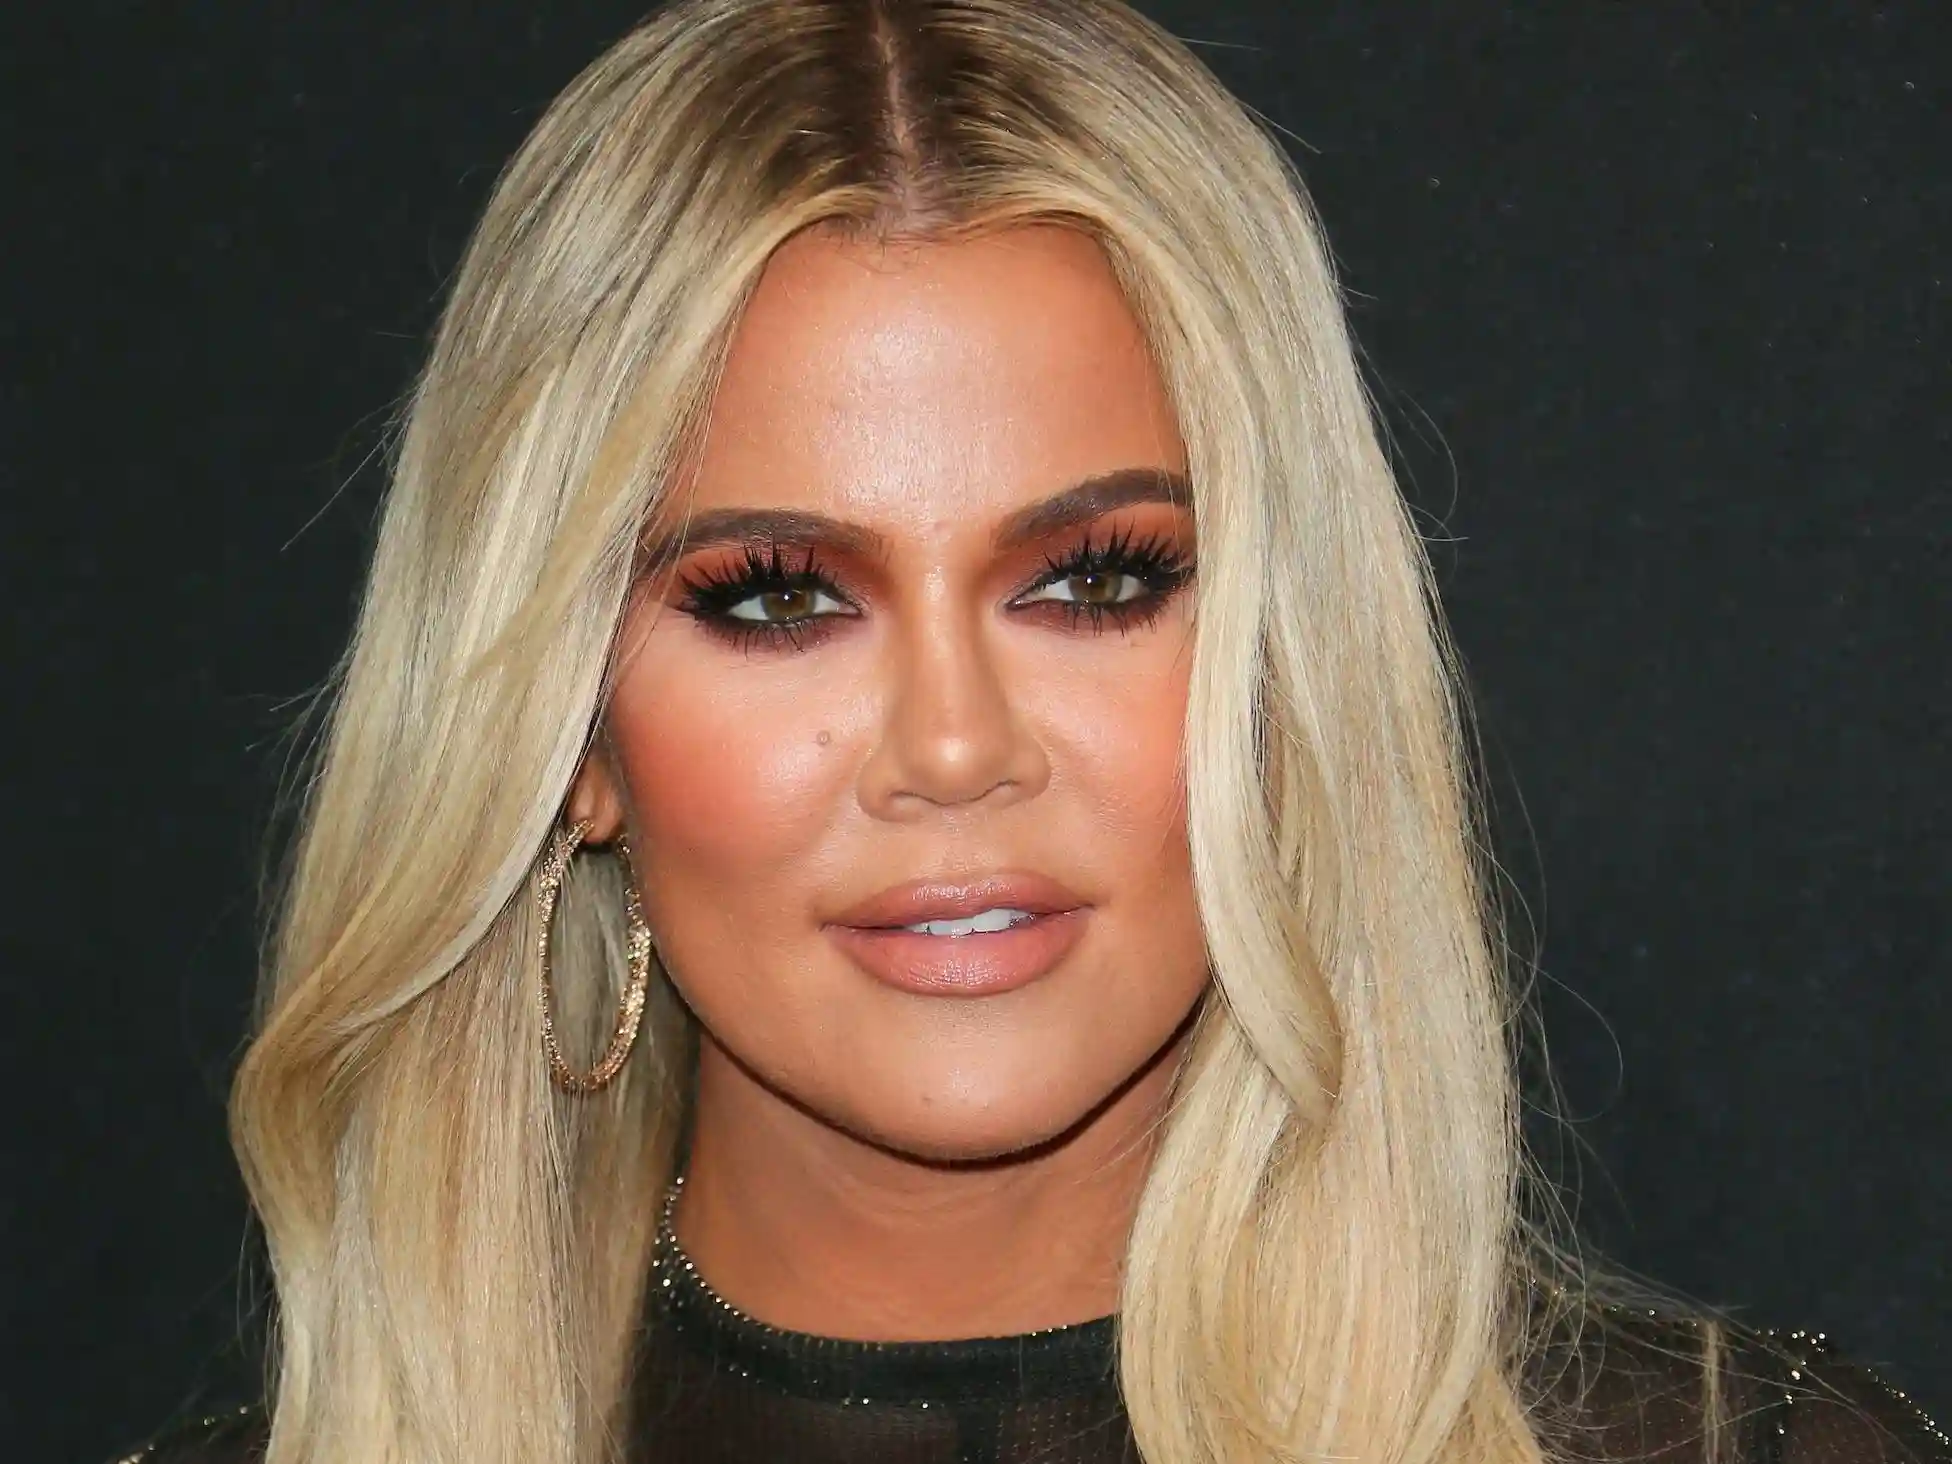 Khloe Kardashian has 'rare' tumour removed from face